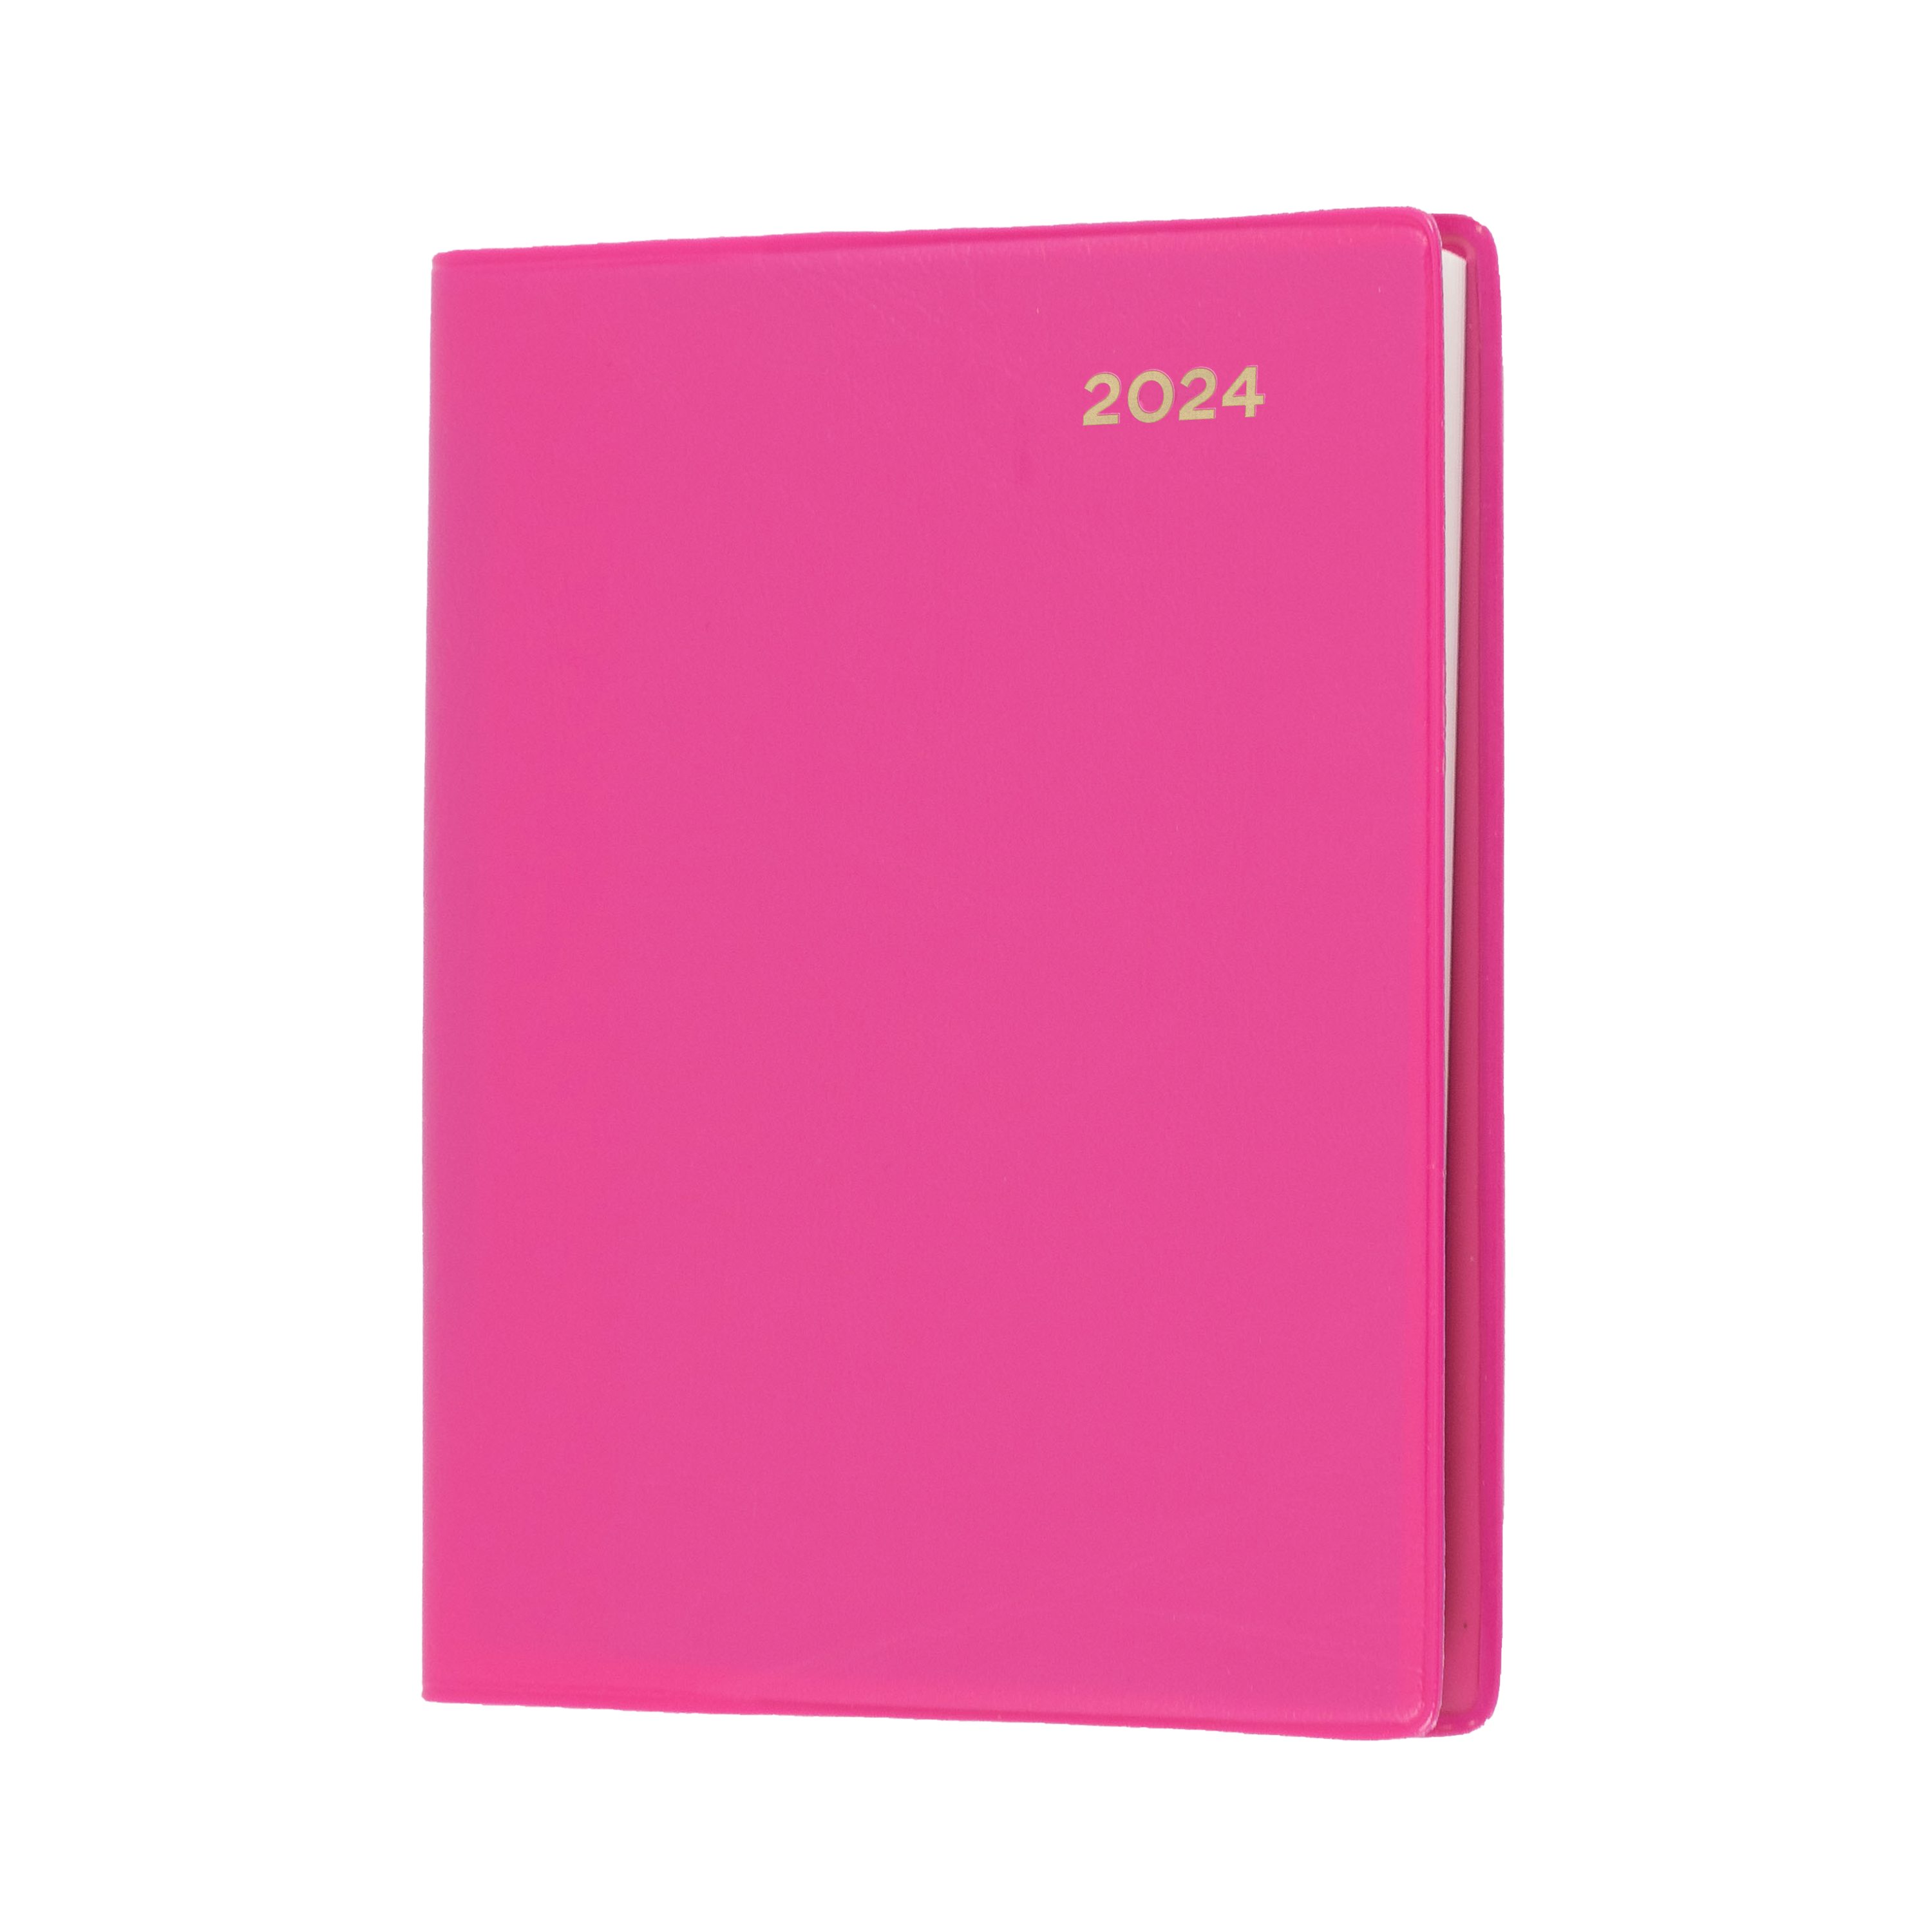 Belmont Colours 2024 Diary - Week to View with pencil, Size A7 Pink / A7 (105 x 74mm)